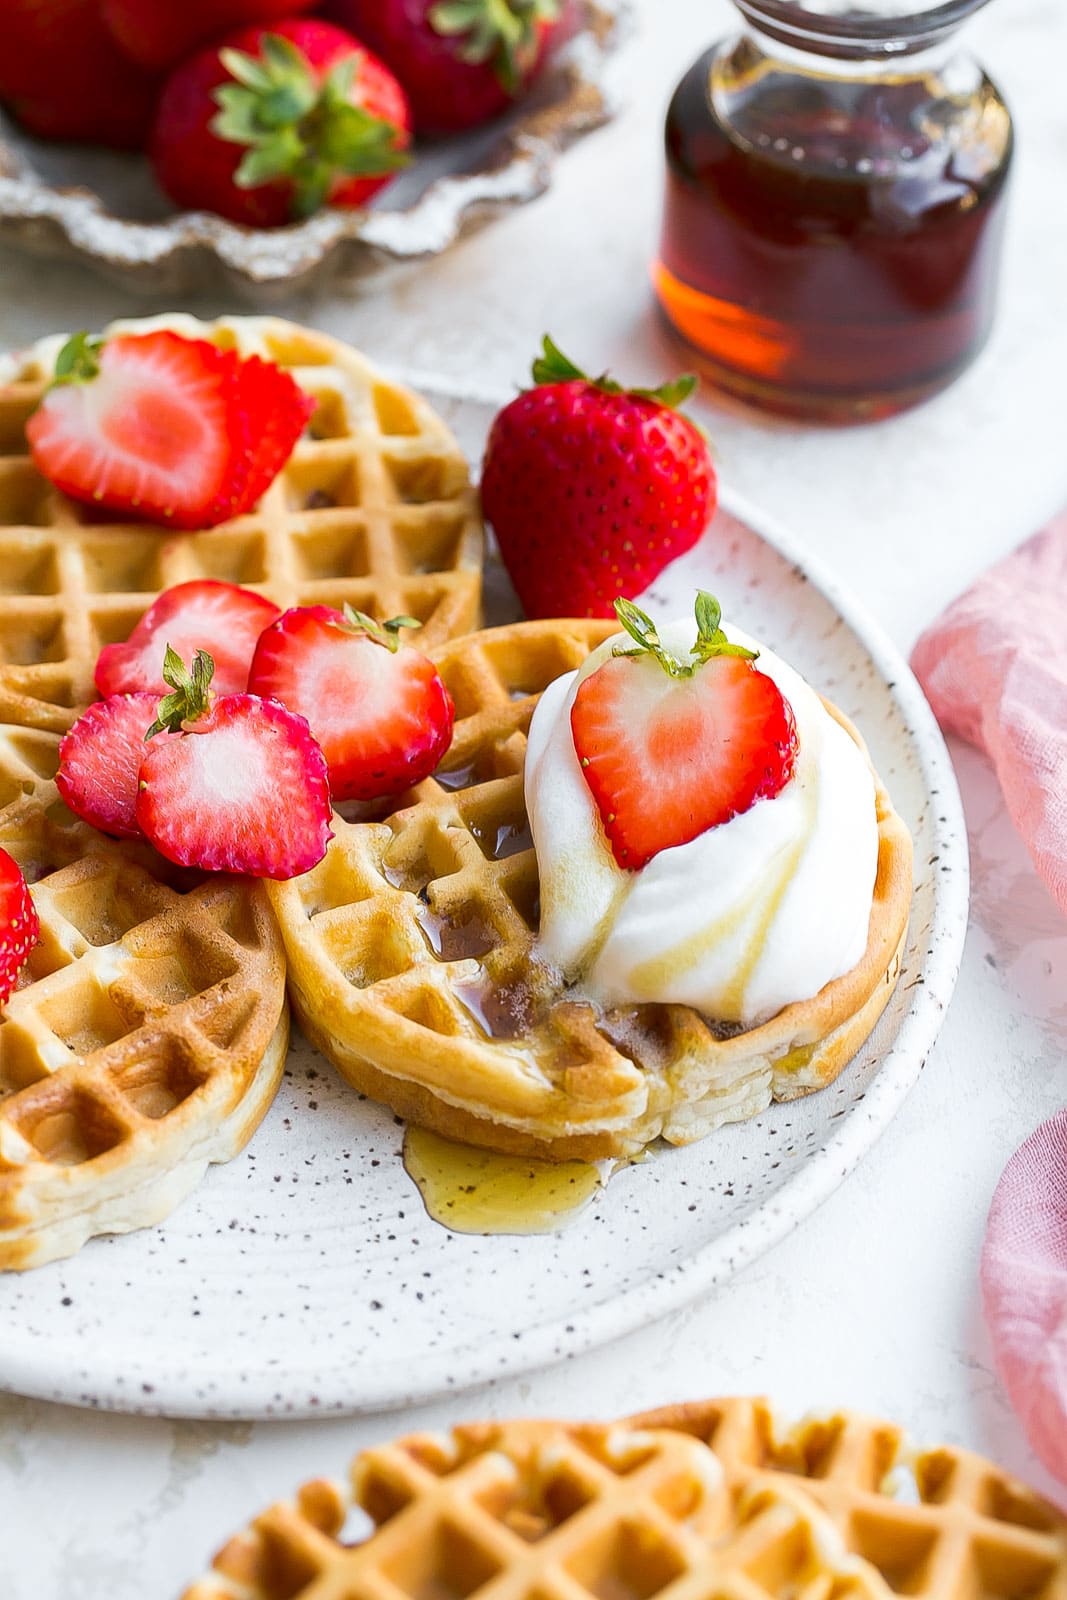 Waffle with fresh strawberries.